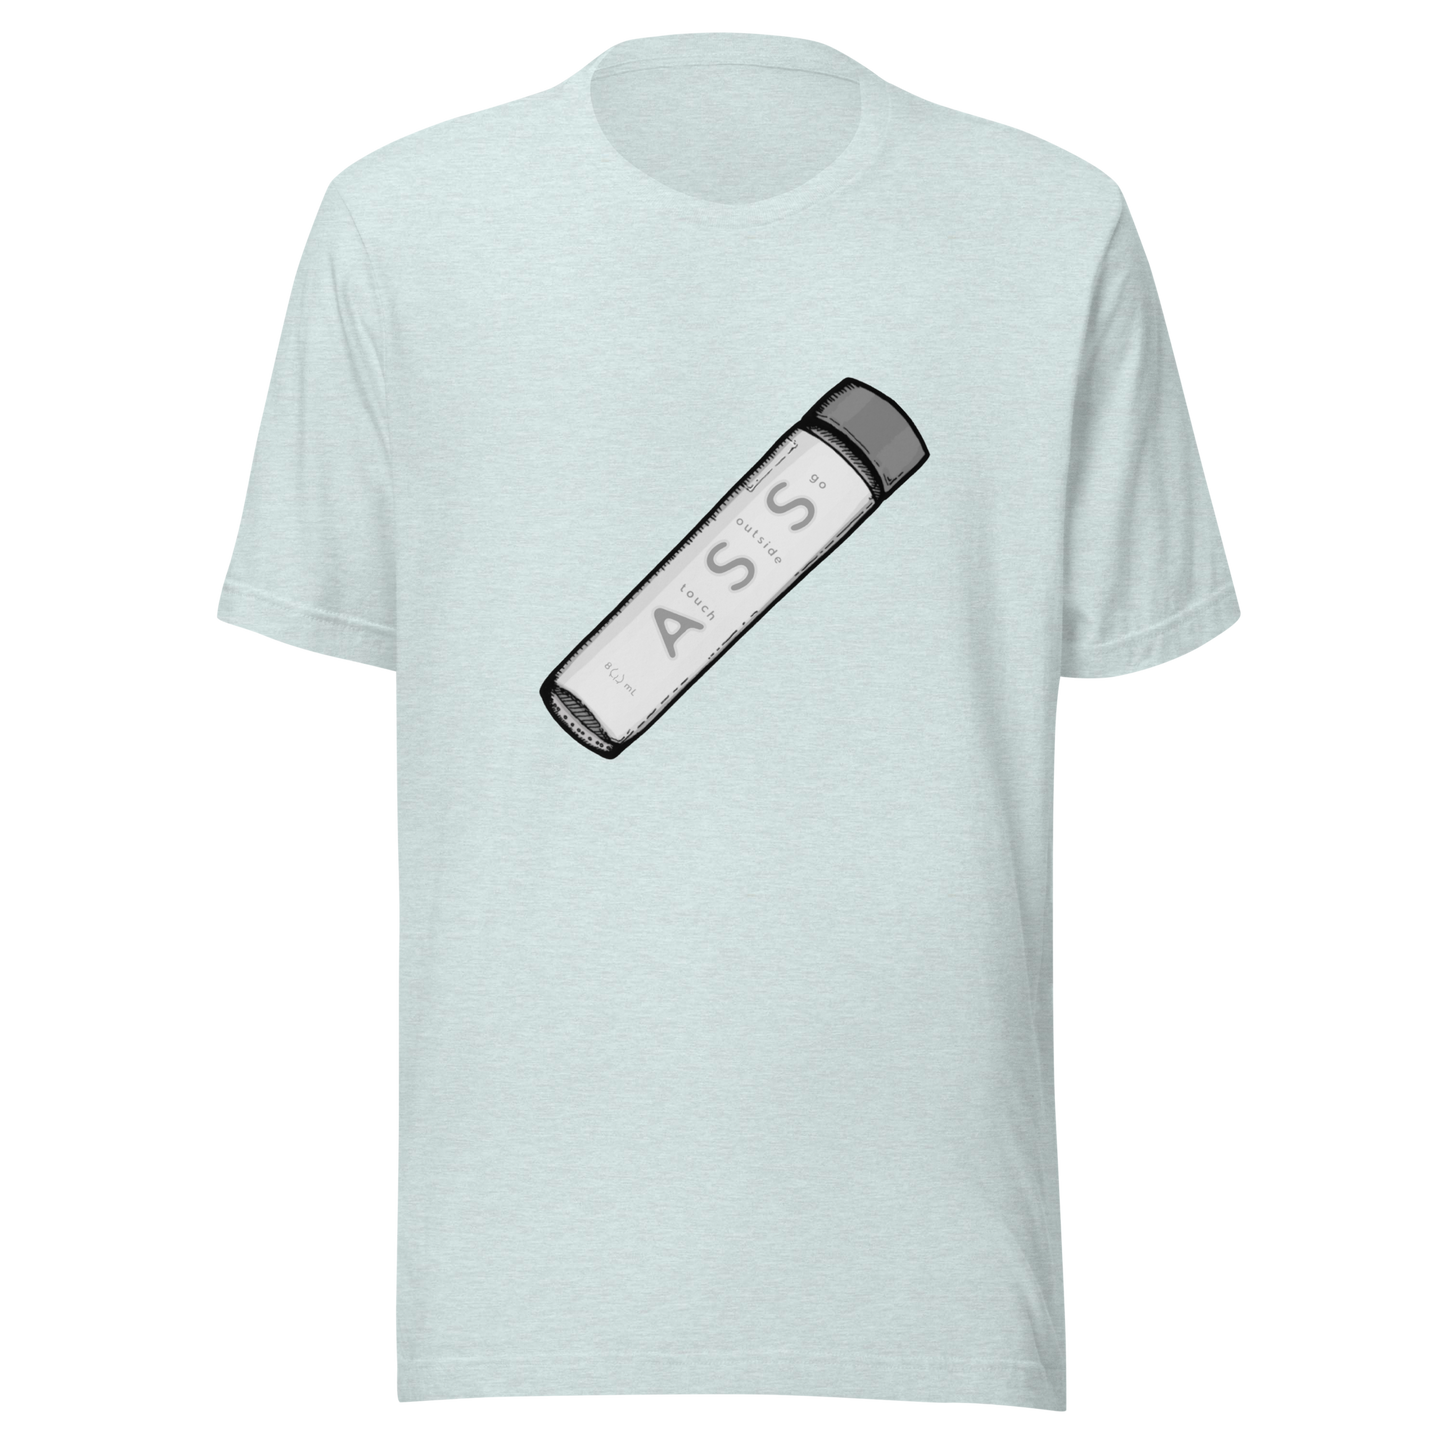 go outside touch ass t-shirt in ice blue - gaslit apparel